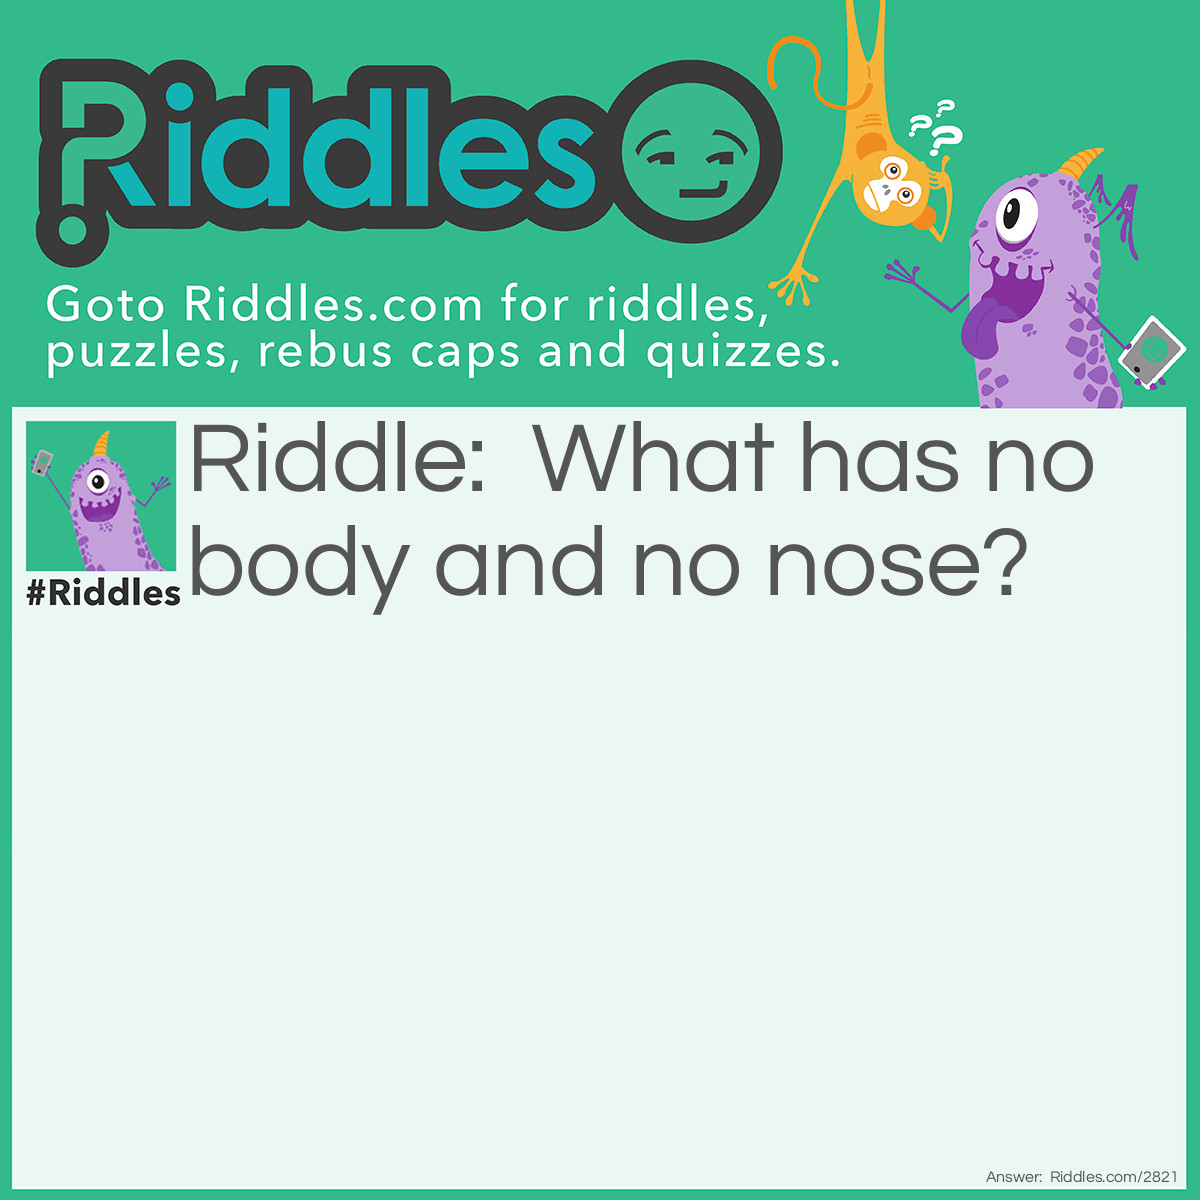 Riddle: What has no body and no nose? Answer: Nobody knows.